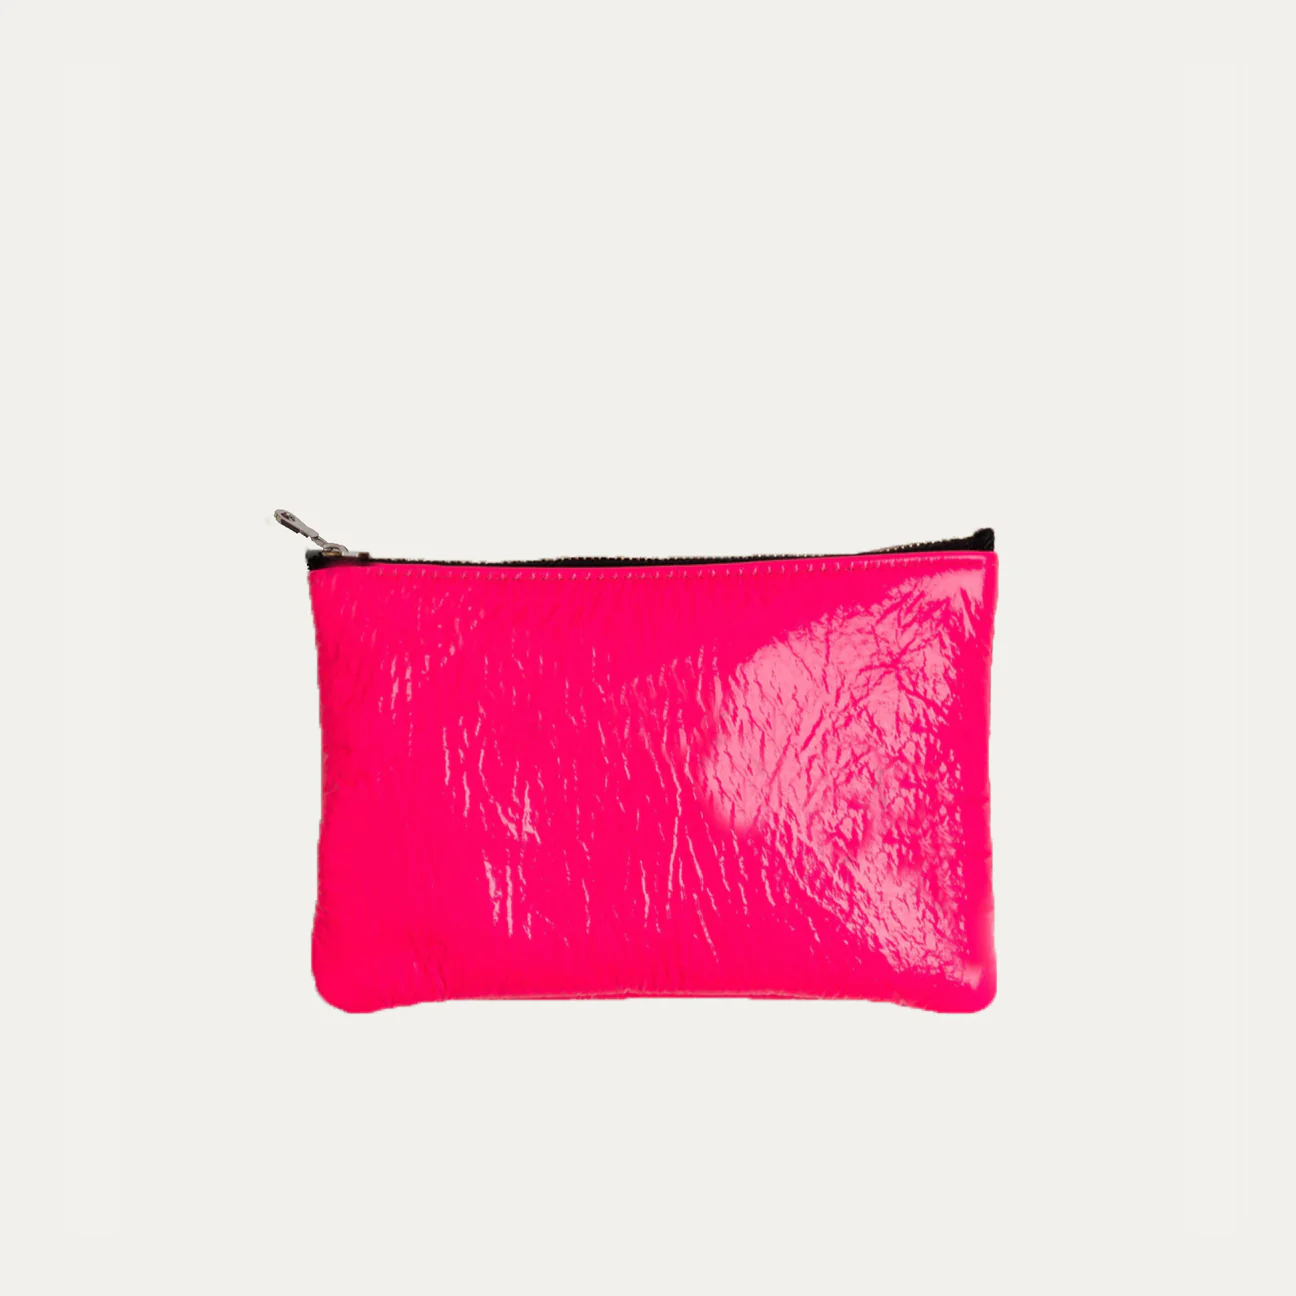 NEP/GH/PPO Pauly Pouch Organizer | Neon Pink + Gold Hardware